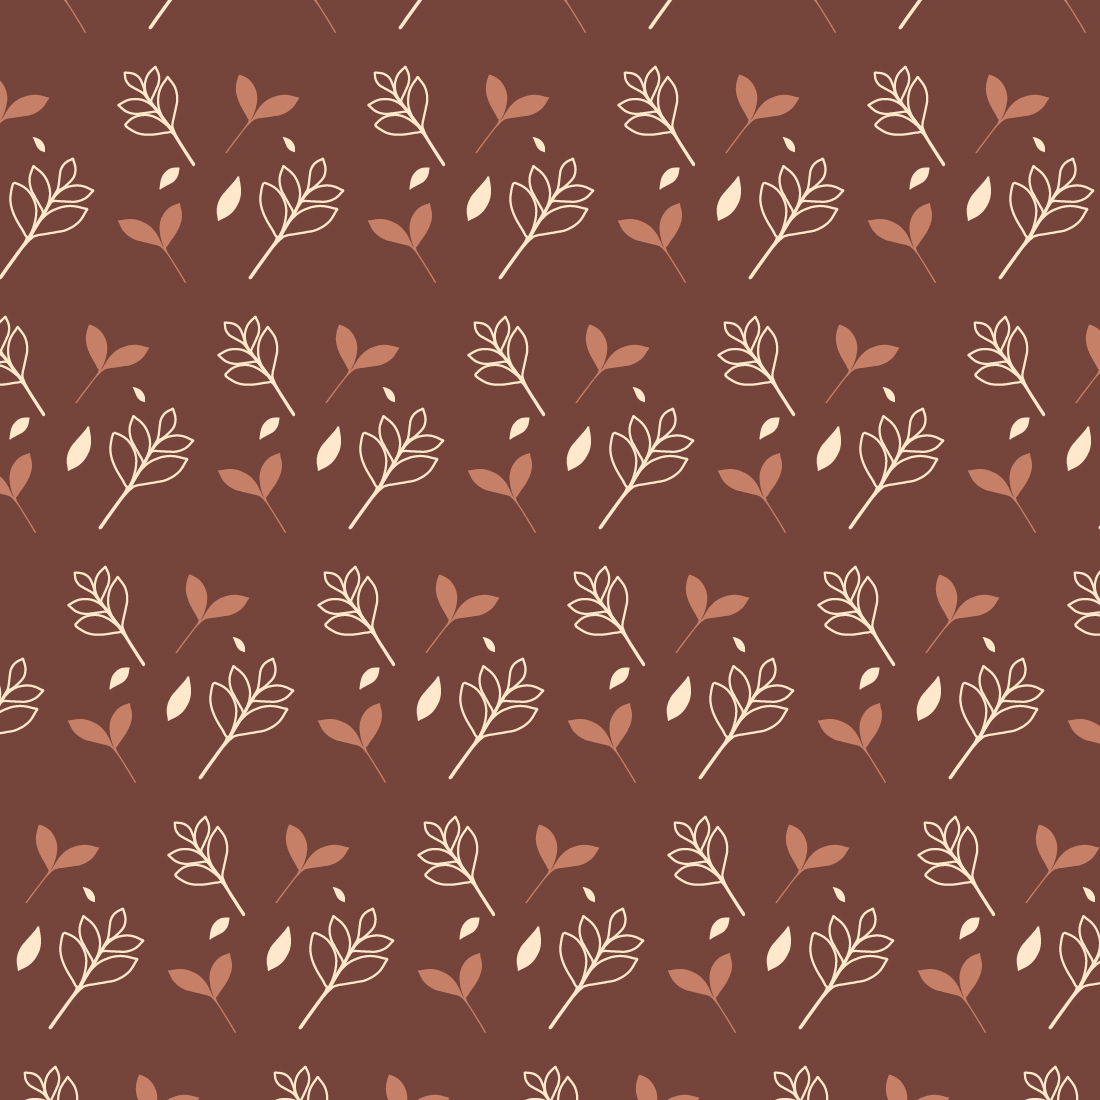 Warm and cozy, floral seamless pattern Made in 3 color options preview image.